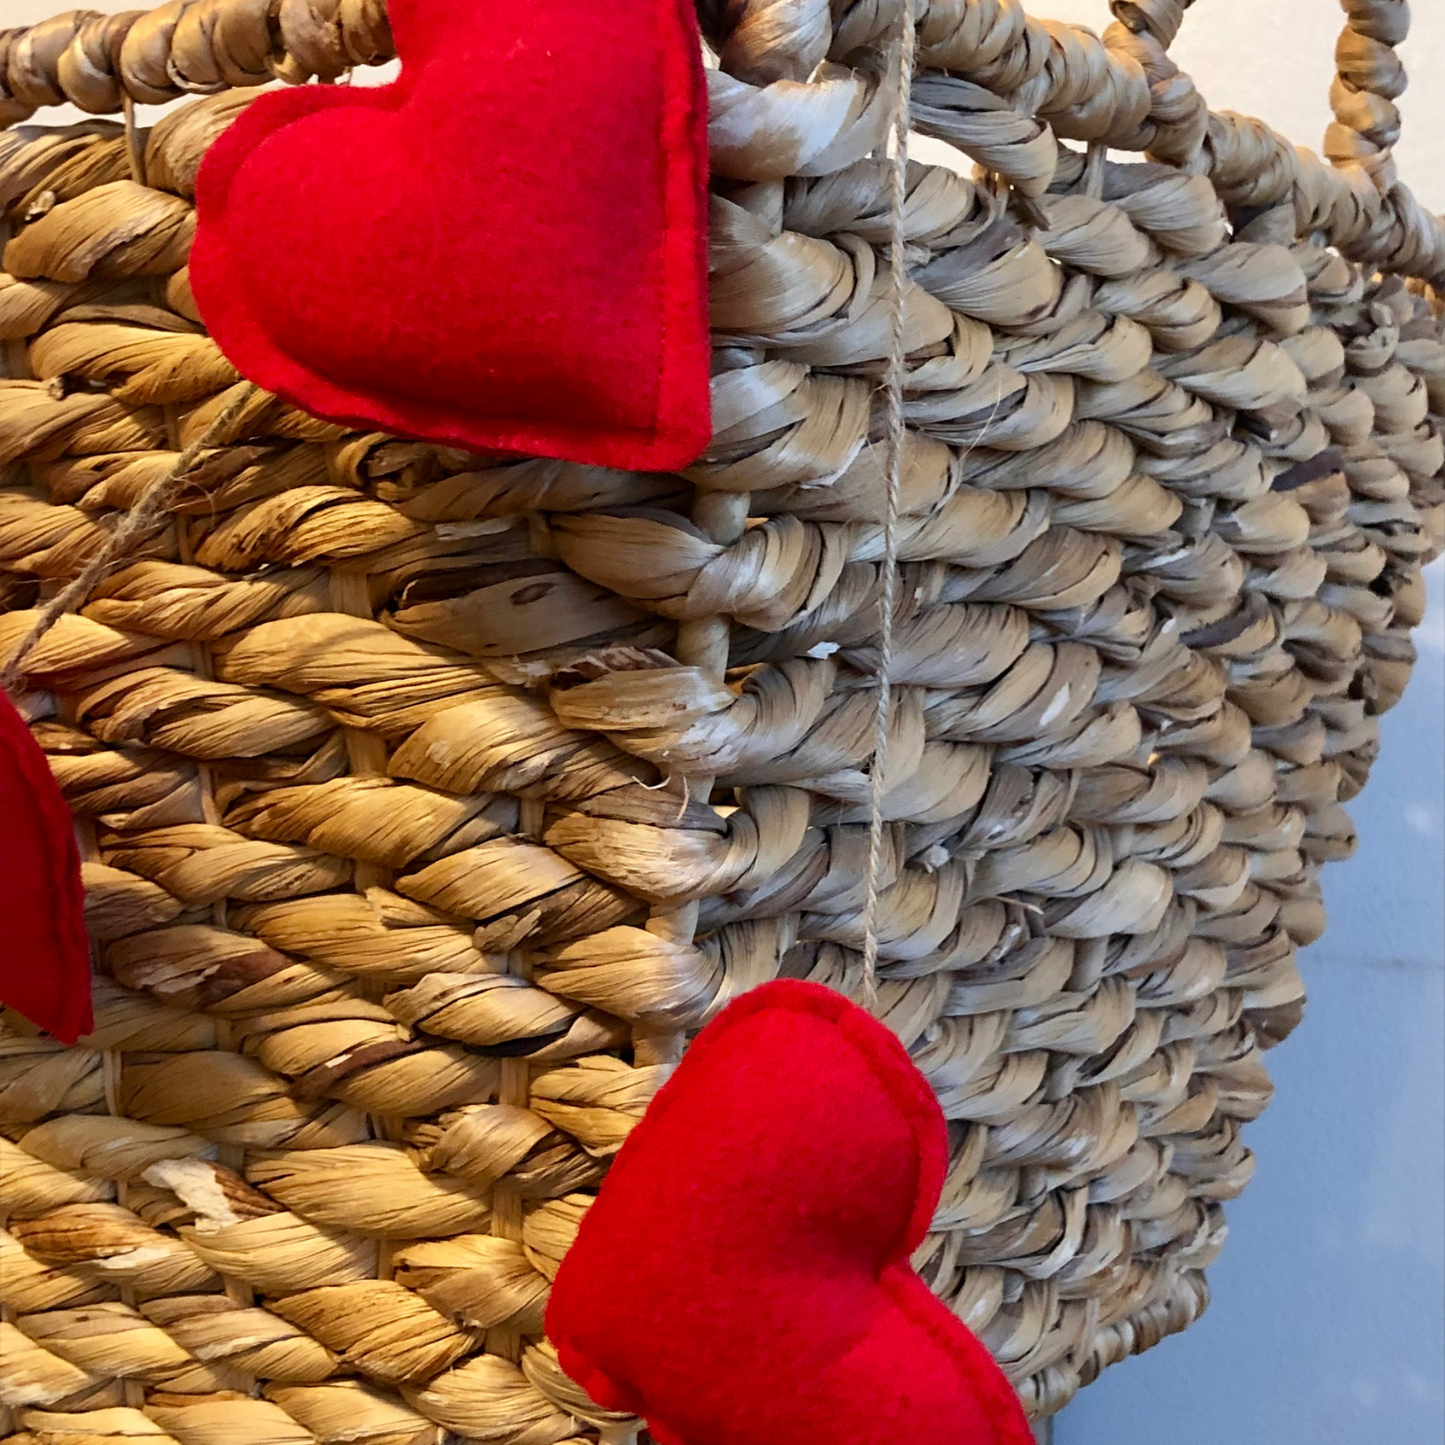 Felted Red Hearts Garland on Jute Twine-5 foot